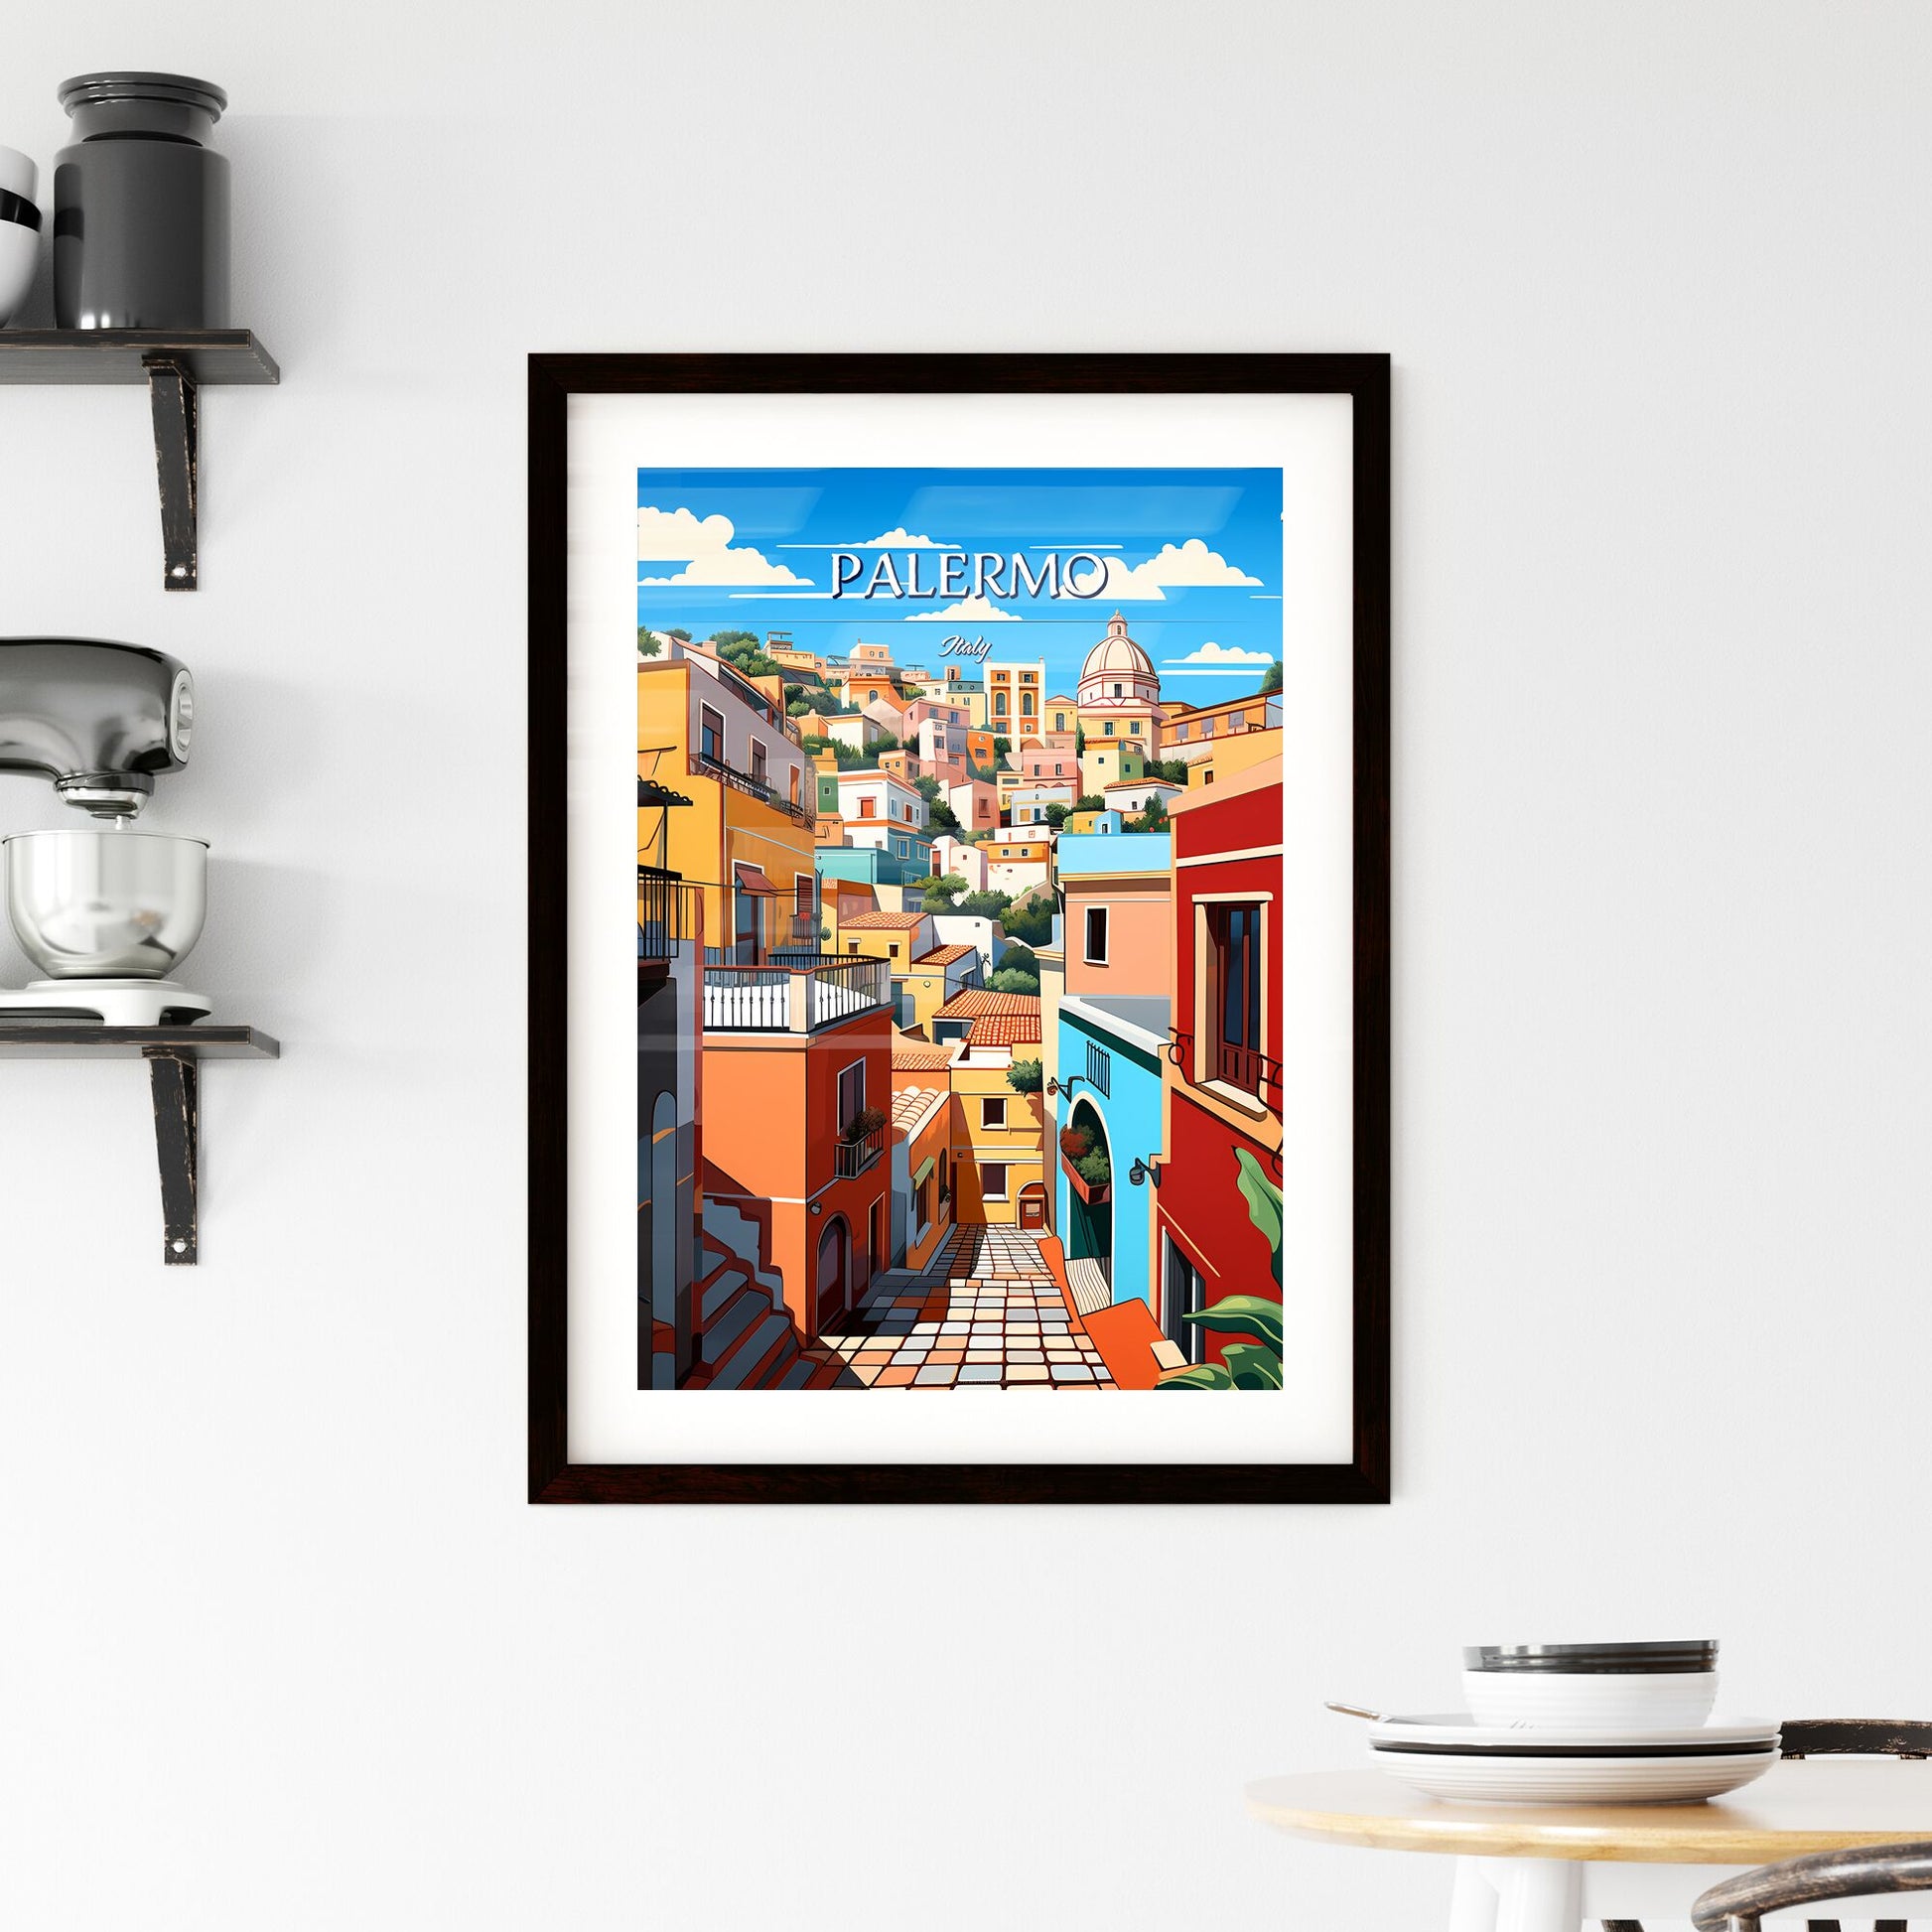 Palermo, Italy - Art print of a colorful buildings on a hill Default Title